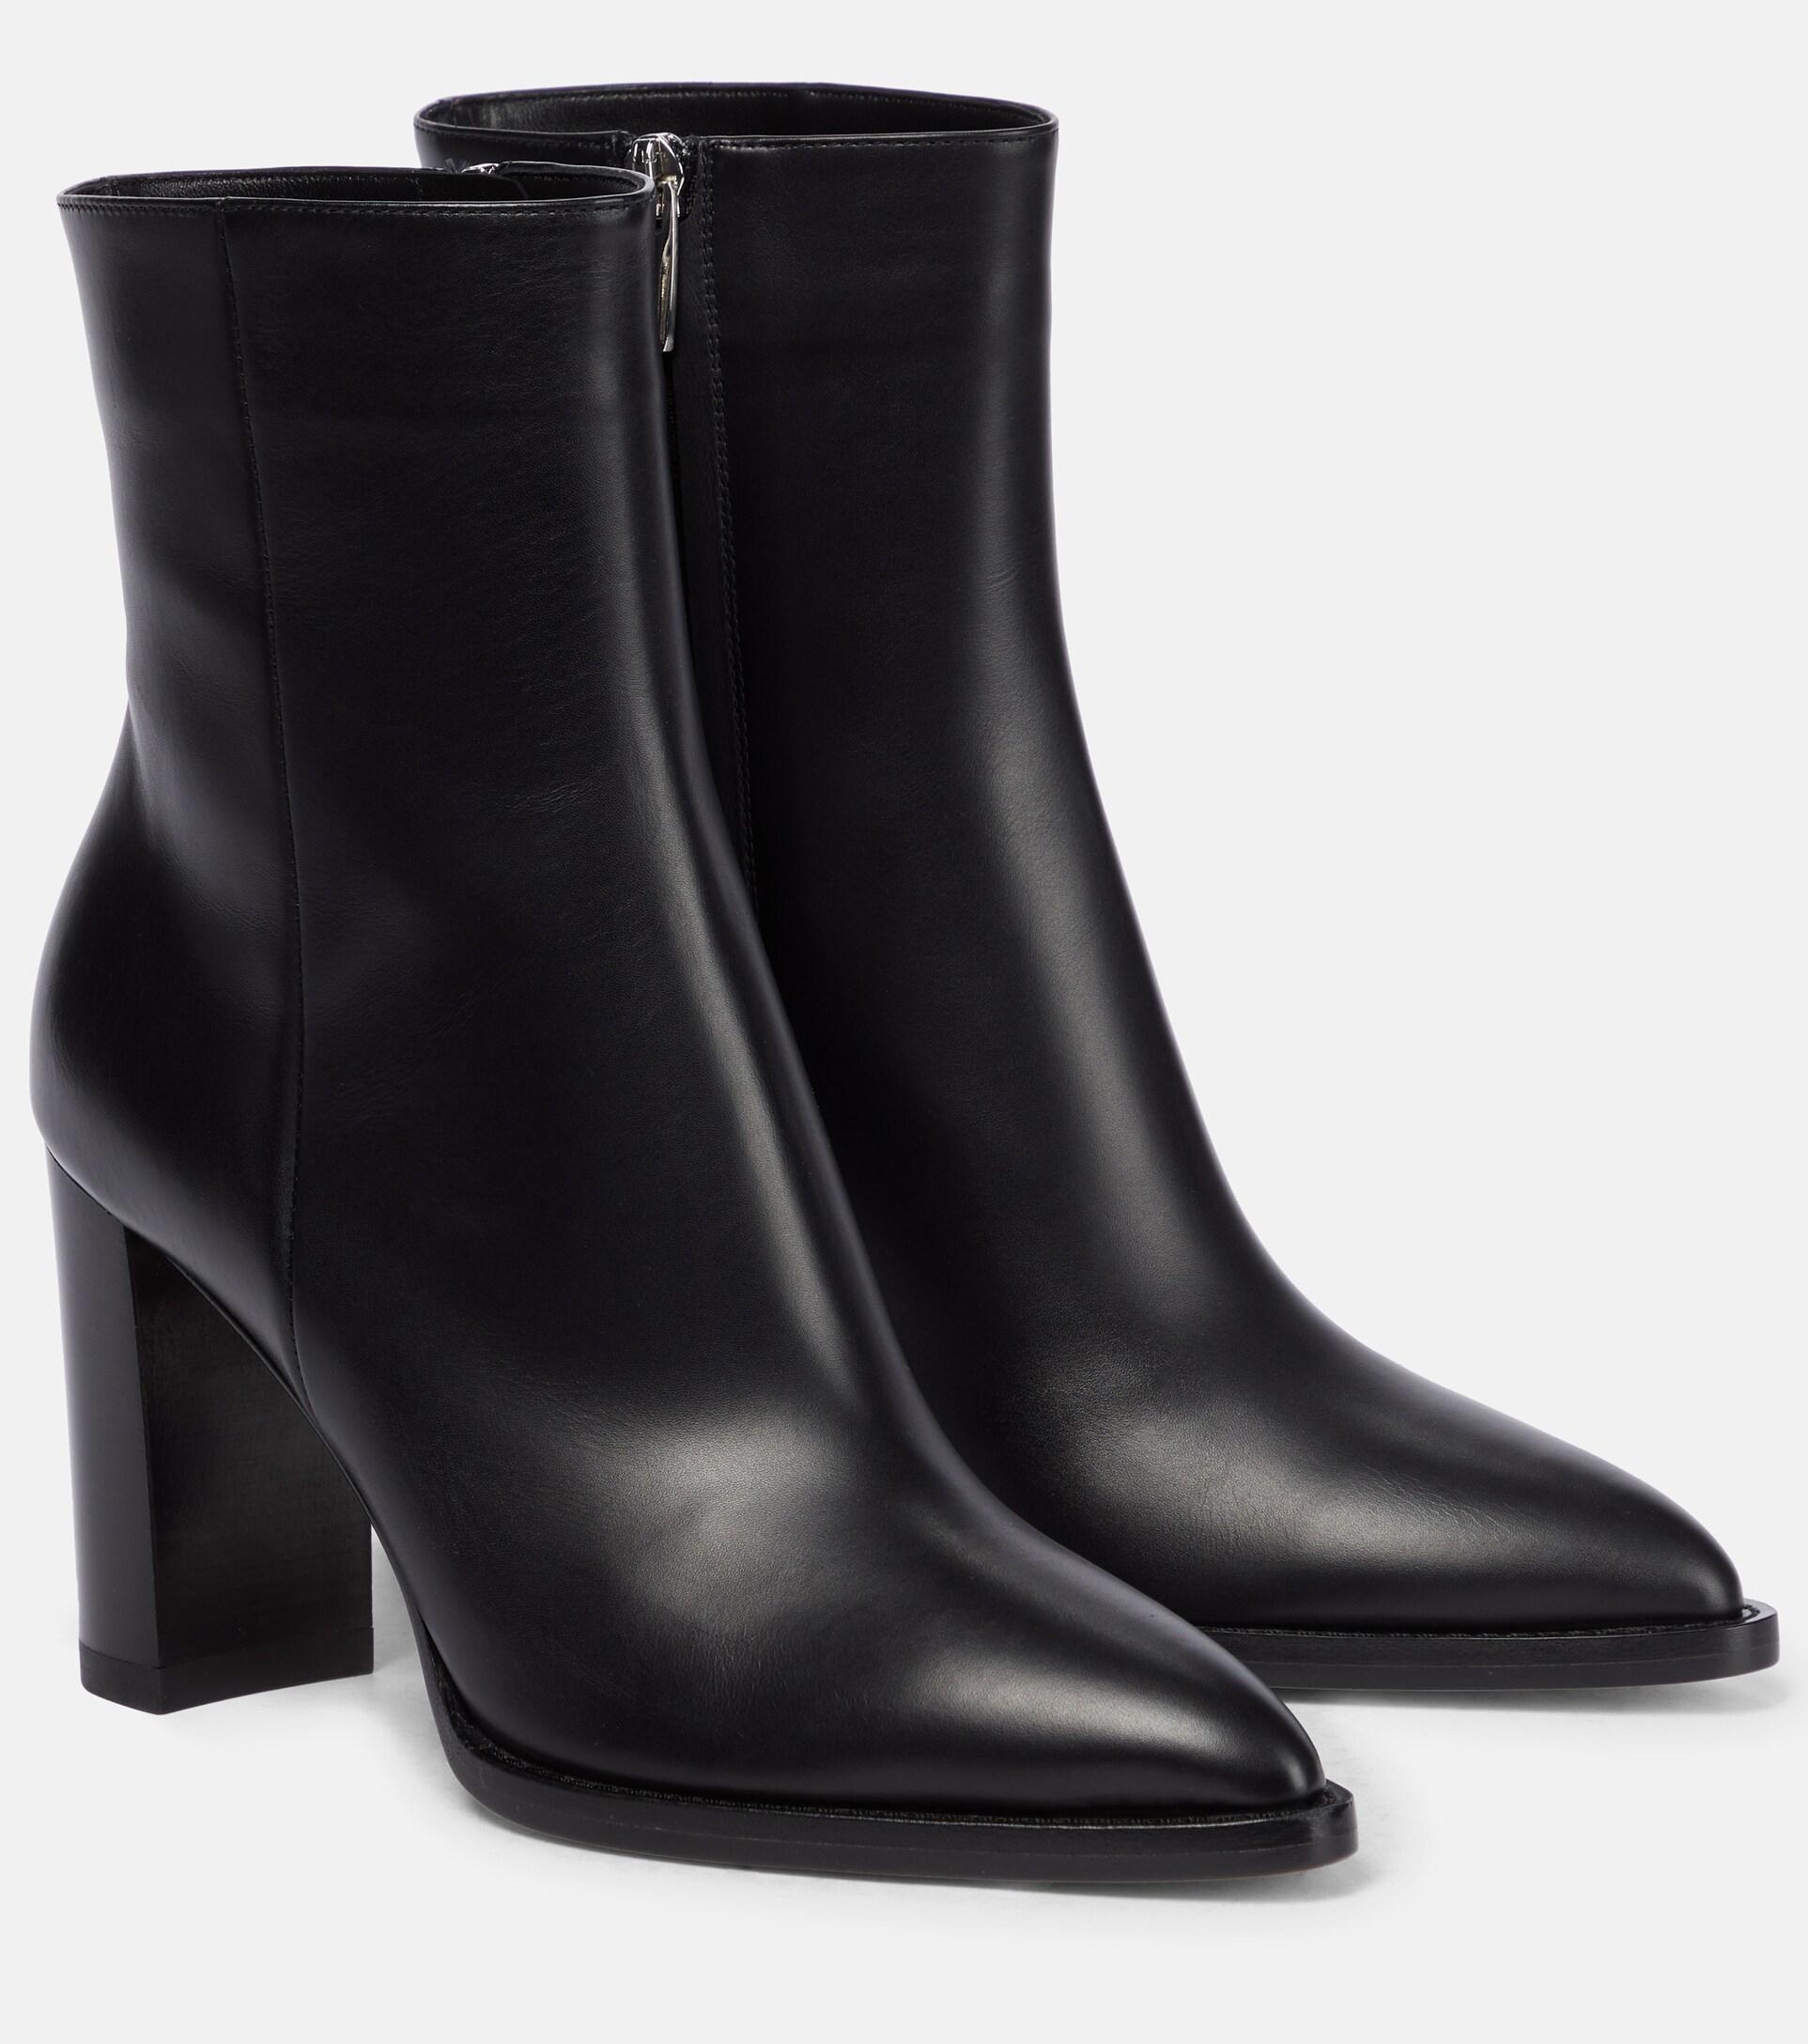 Gianvito Rossi River 85 Leather Ankle Boots in Black | Lyst